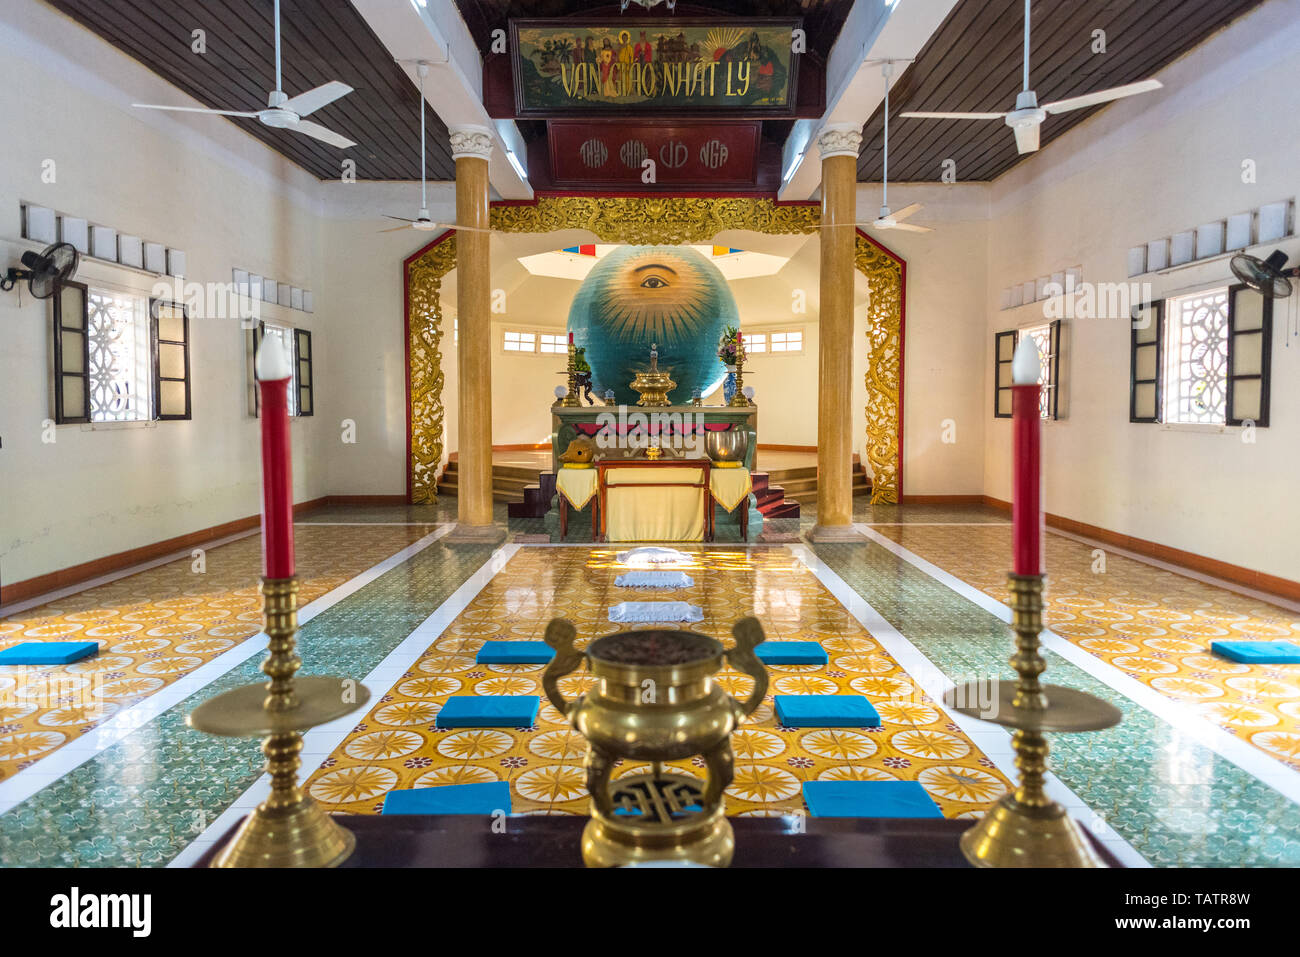 Da Nang, Vietnam - March 25, 2019: an interior of Trung Hung Buu Toa Cao Dai, a Caodaist temple, with the sphere of Left Eye of God in the center. Stock Photo